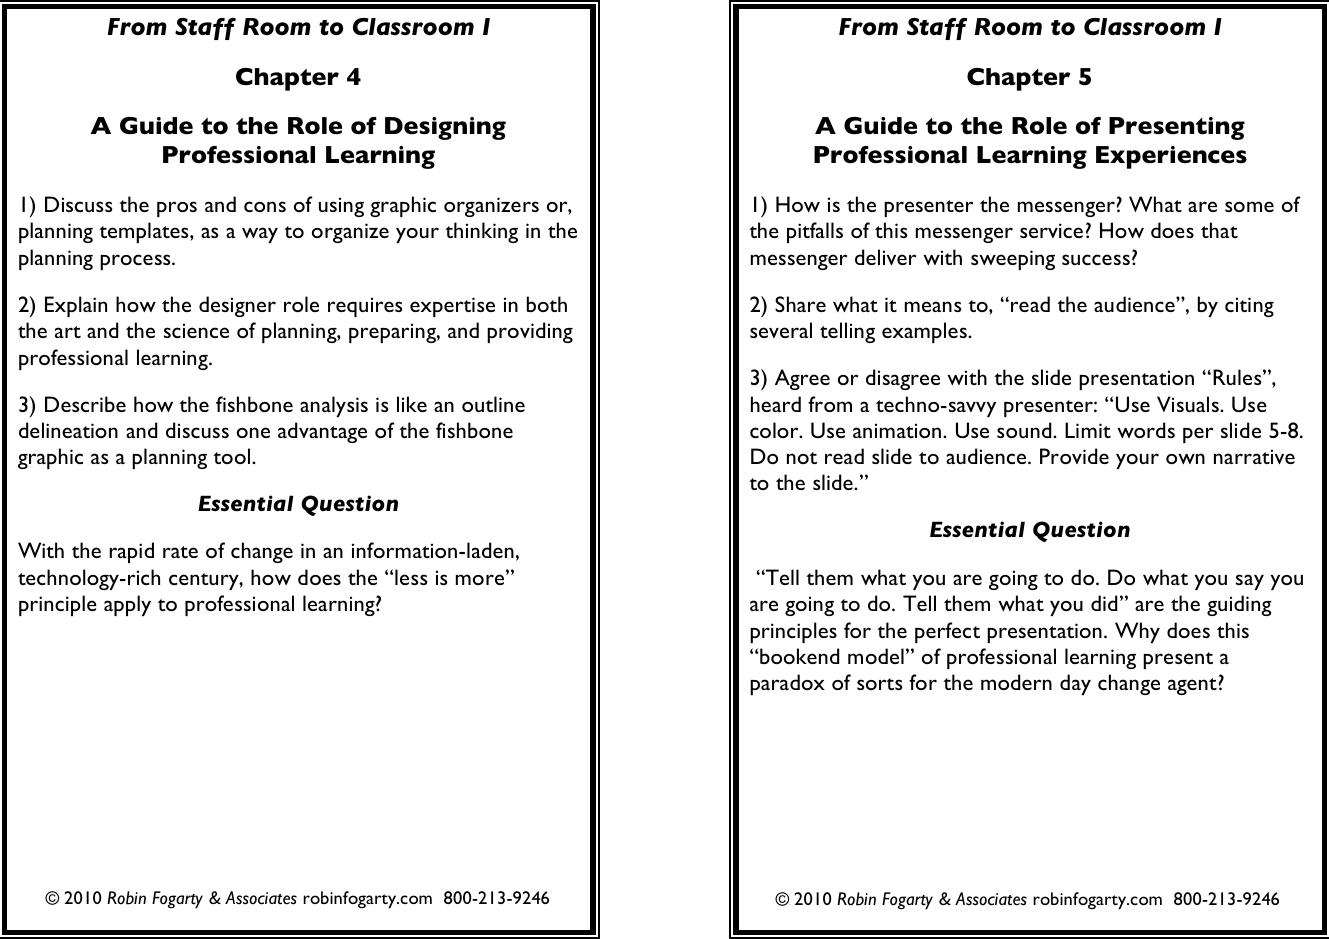 Page 3 of 6 - DiscussionGuide Staff Class Discussion Guide